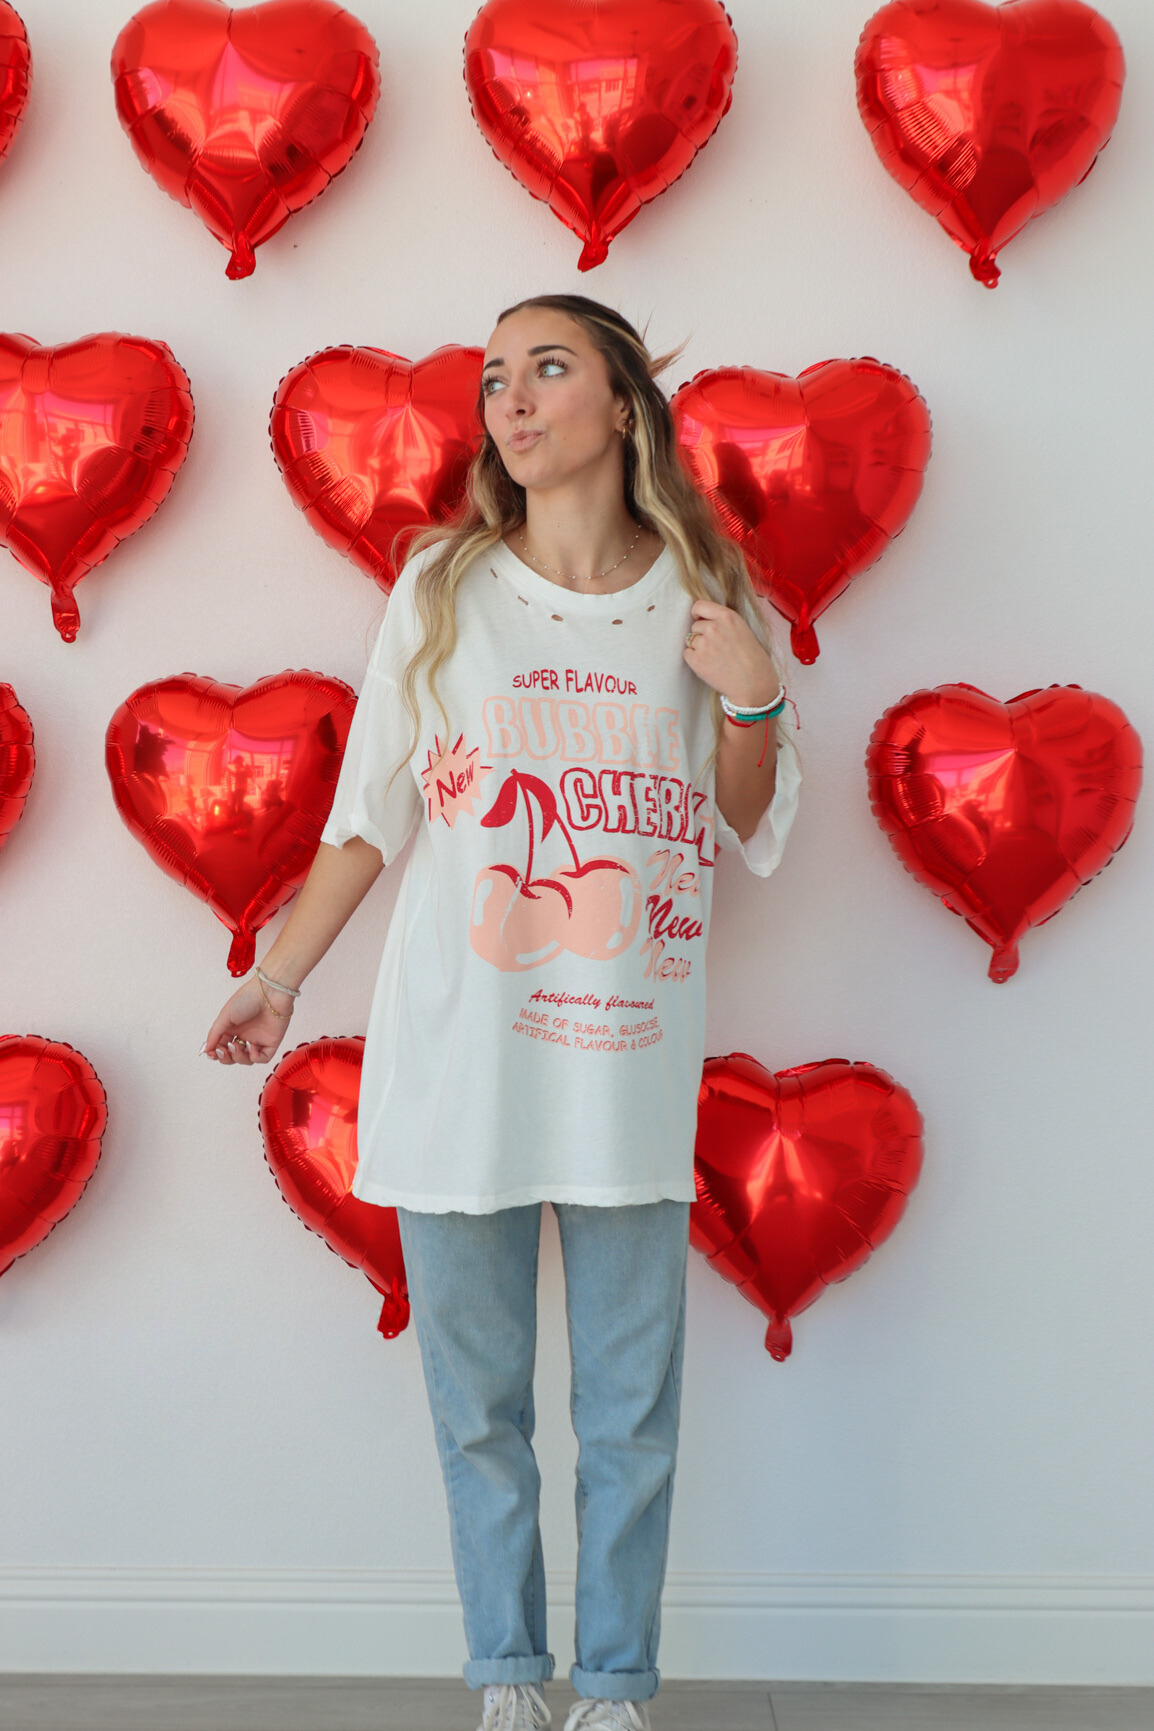 girl wearing white oversized graphic tee, "bubble cherry" graphic 